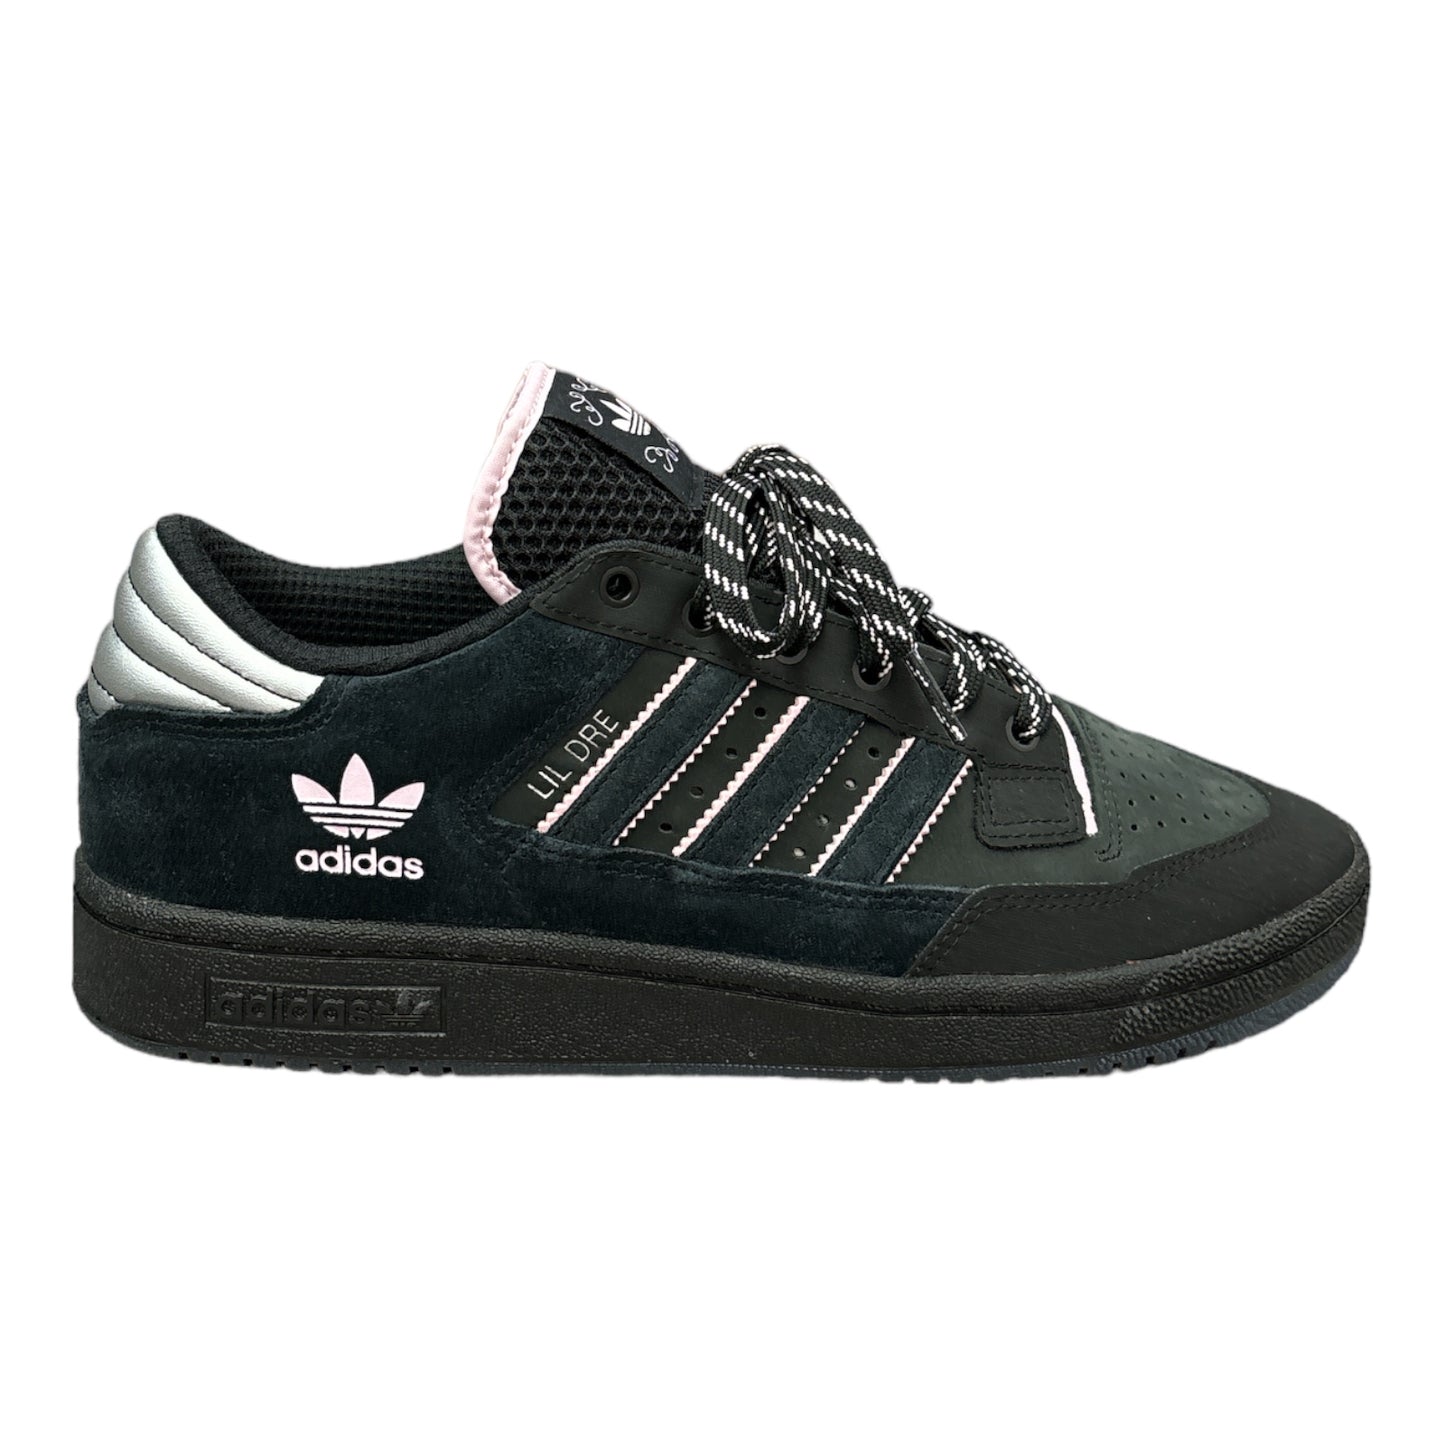 Black Suede Adidas Centennial 85 Lo ADV with Pink & Silver Accents. 